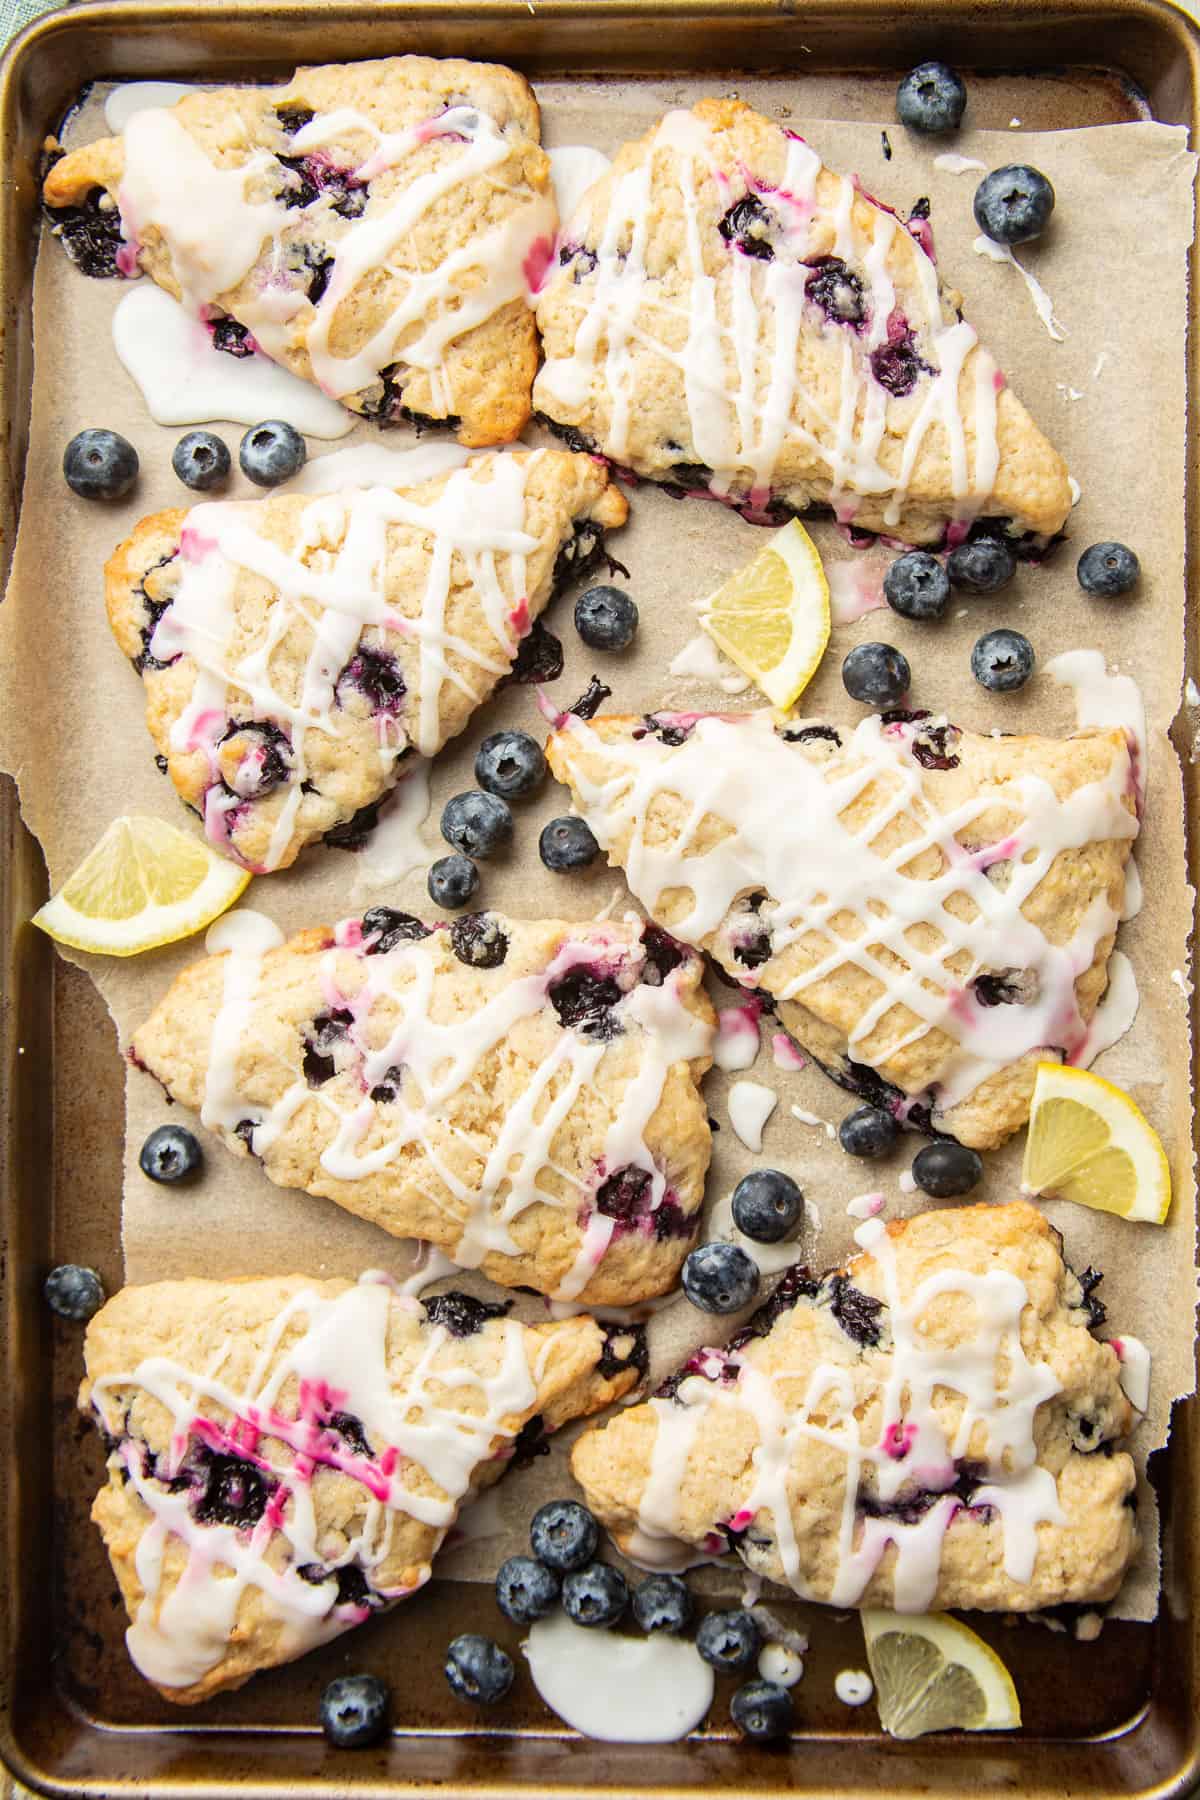 Vegan Blueberry Scones on a baking sheet with blueberries and lemon slices.